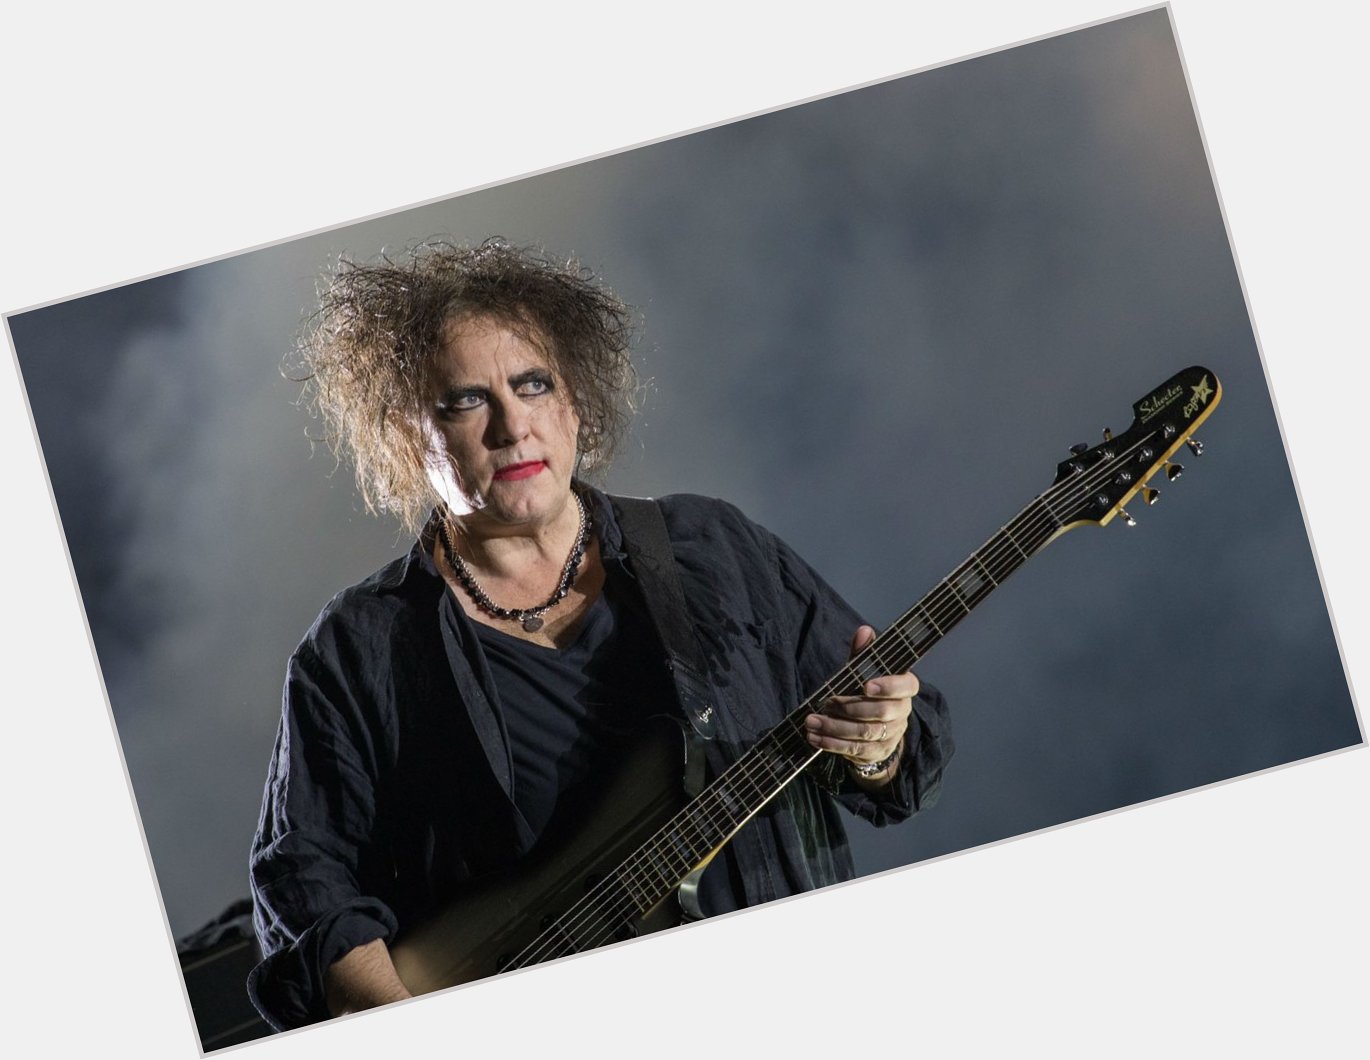 Please join me here at in wishing the one and only Robert Smith a very Happy 62nd Birthday today  